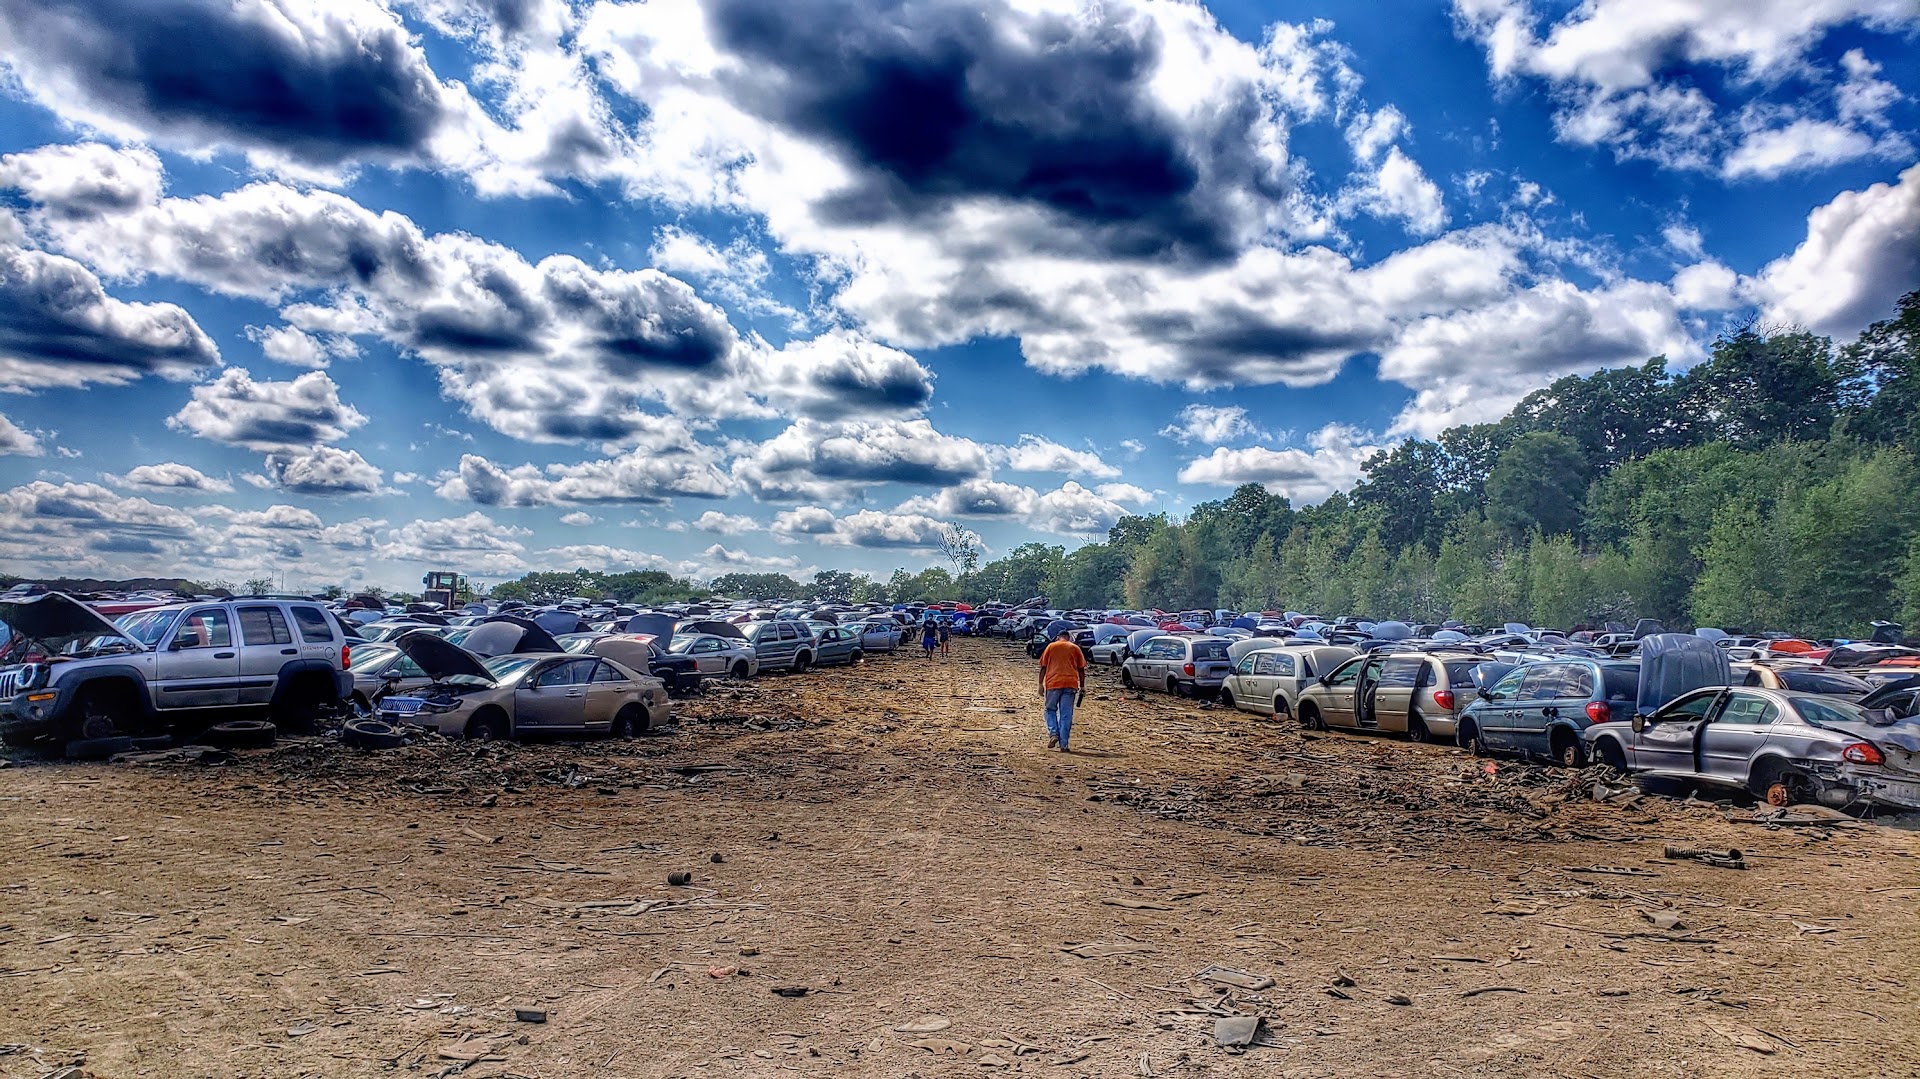 Salvage yard In Worcester MA 